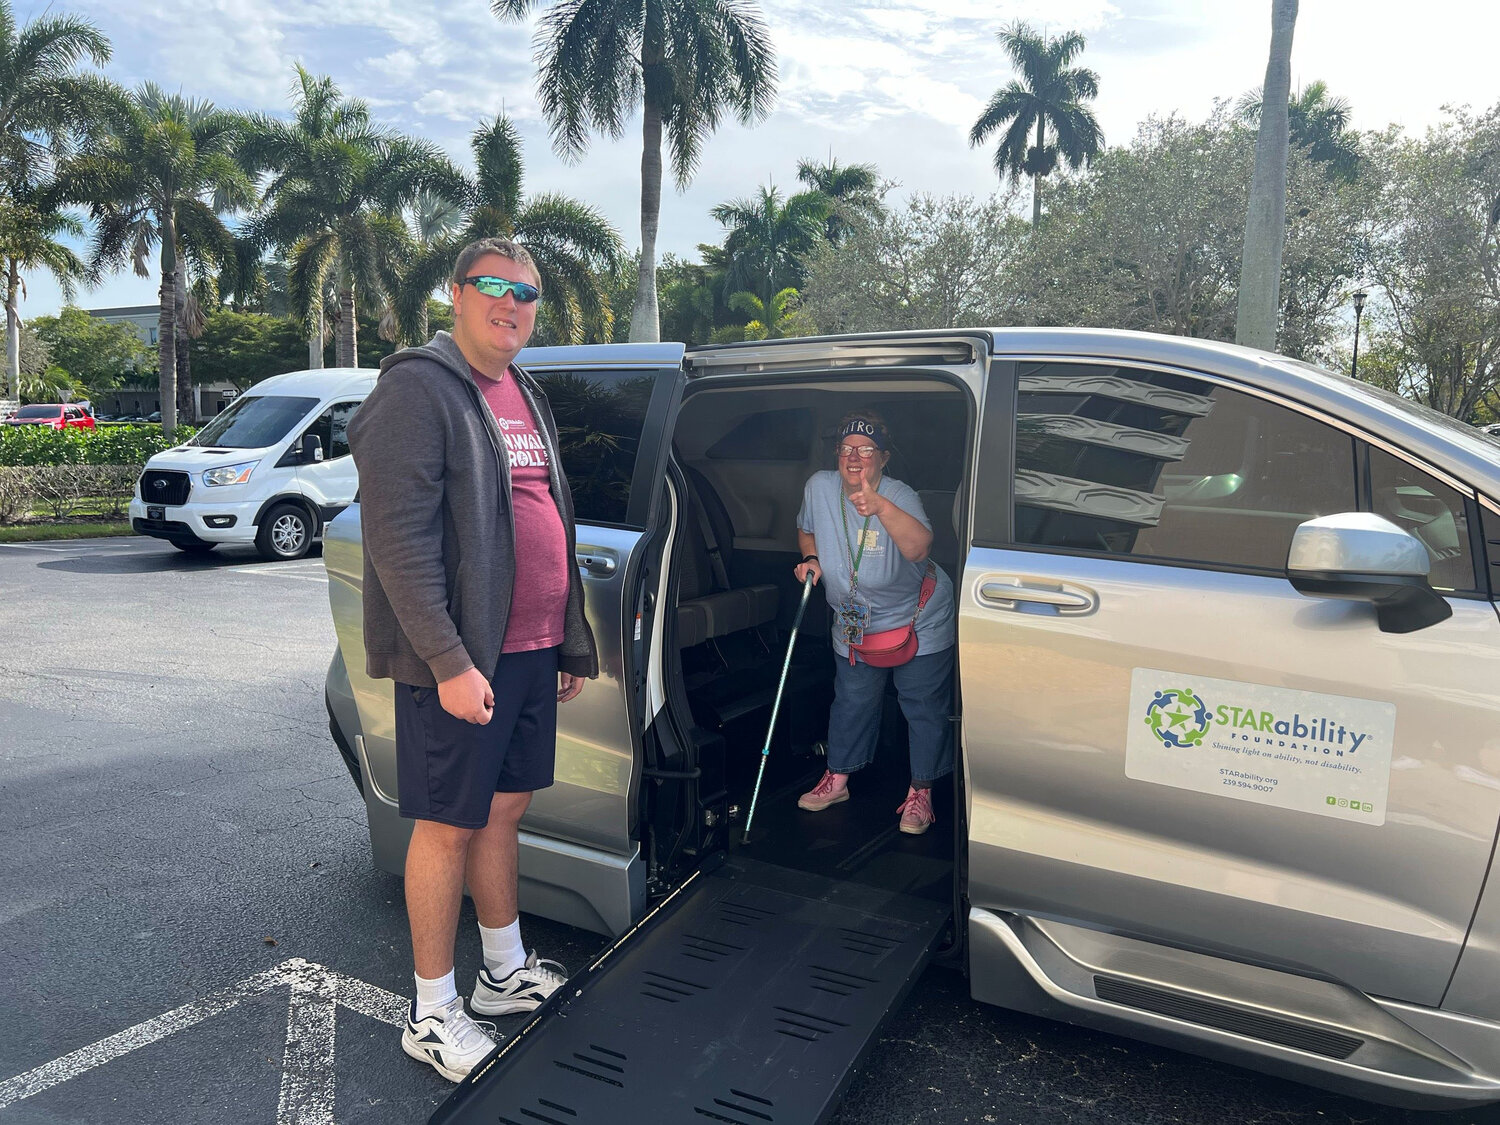 evin T. and Tiffany W. test out STARability Foundation’s new wheelchair-accessible transport van that will help expand services and opportunities for STAR participants that rely on wheelchairs and walkers.

Photo courtesy STARabili